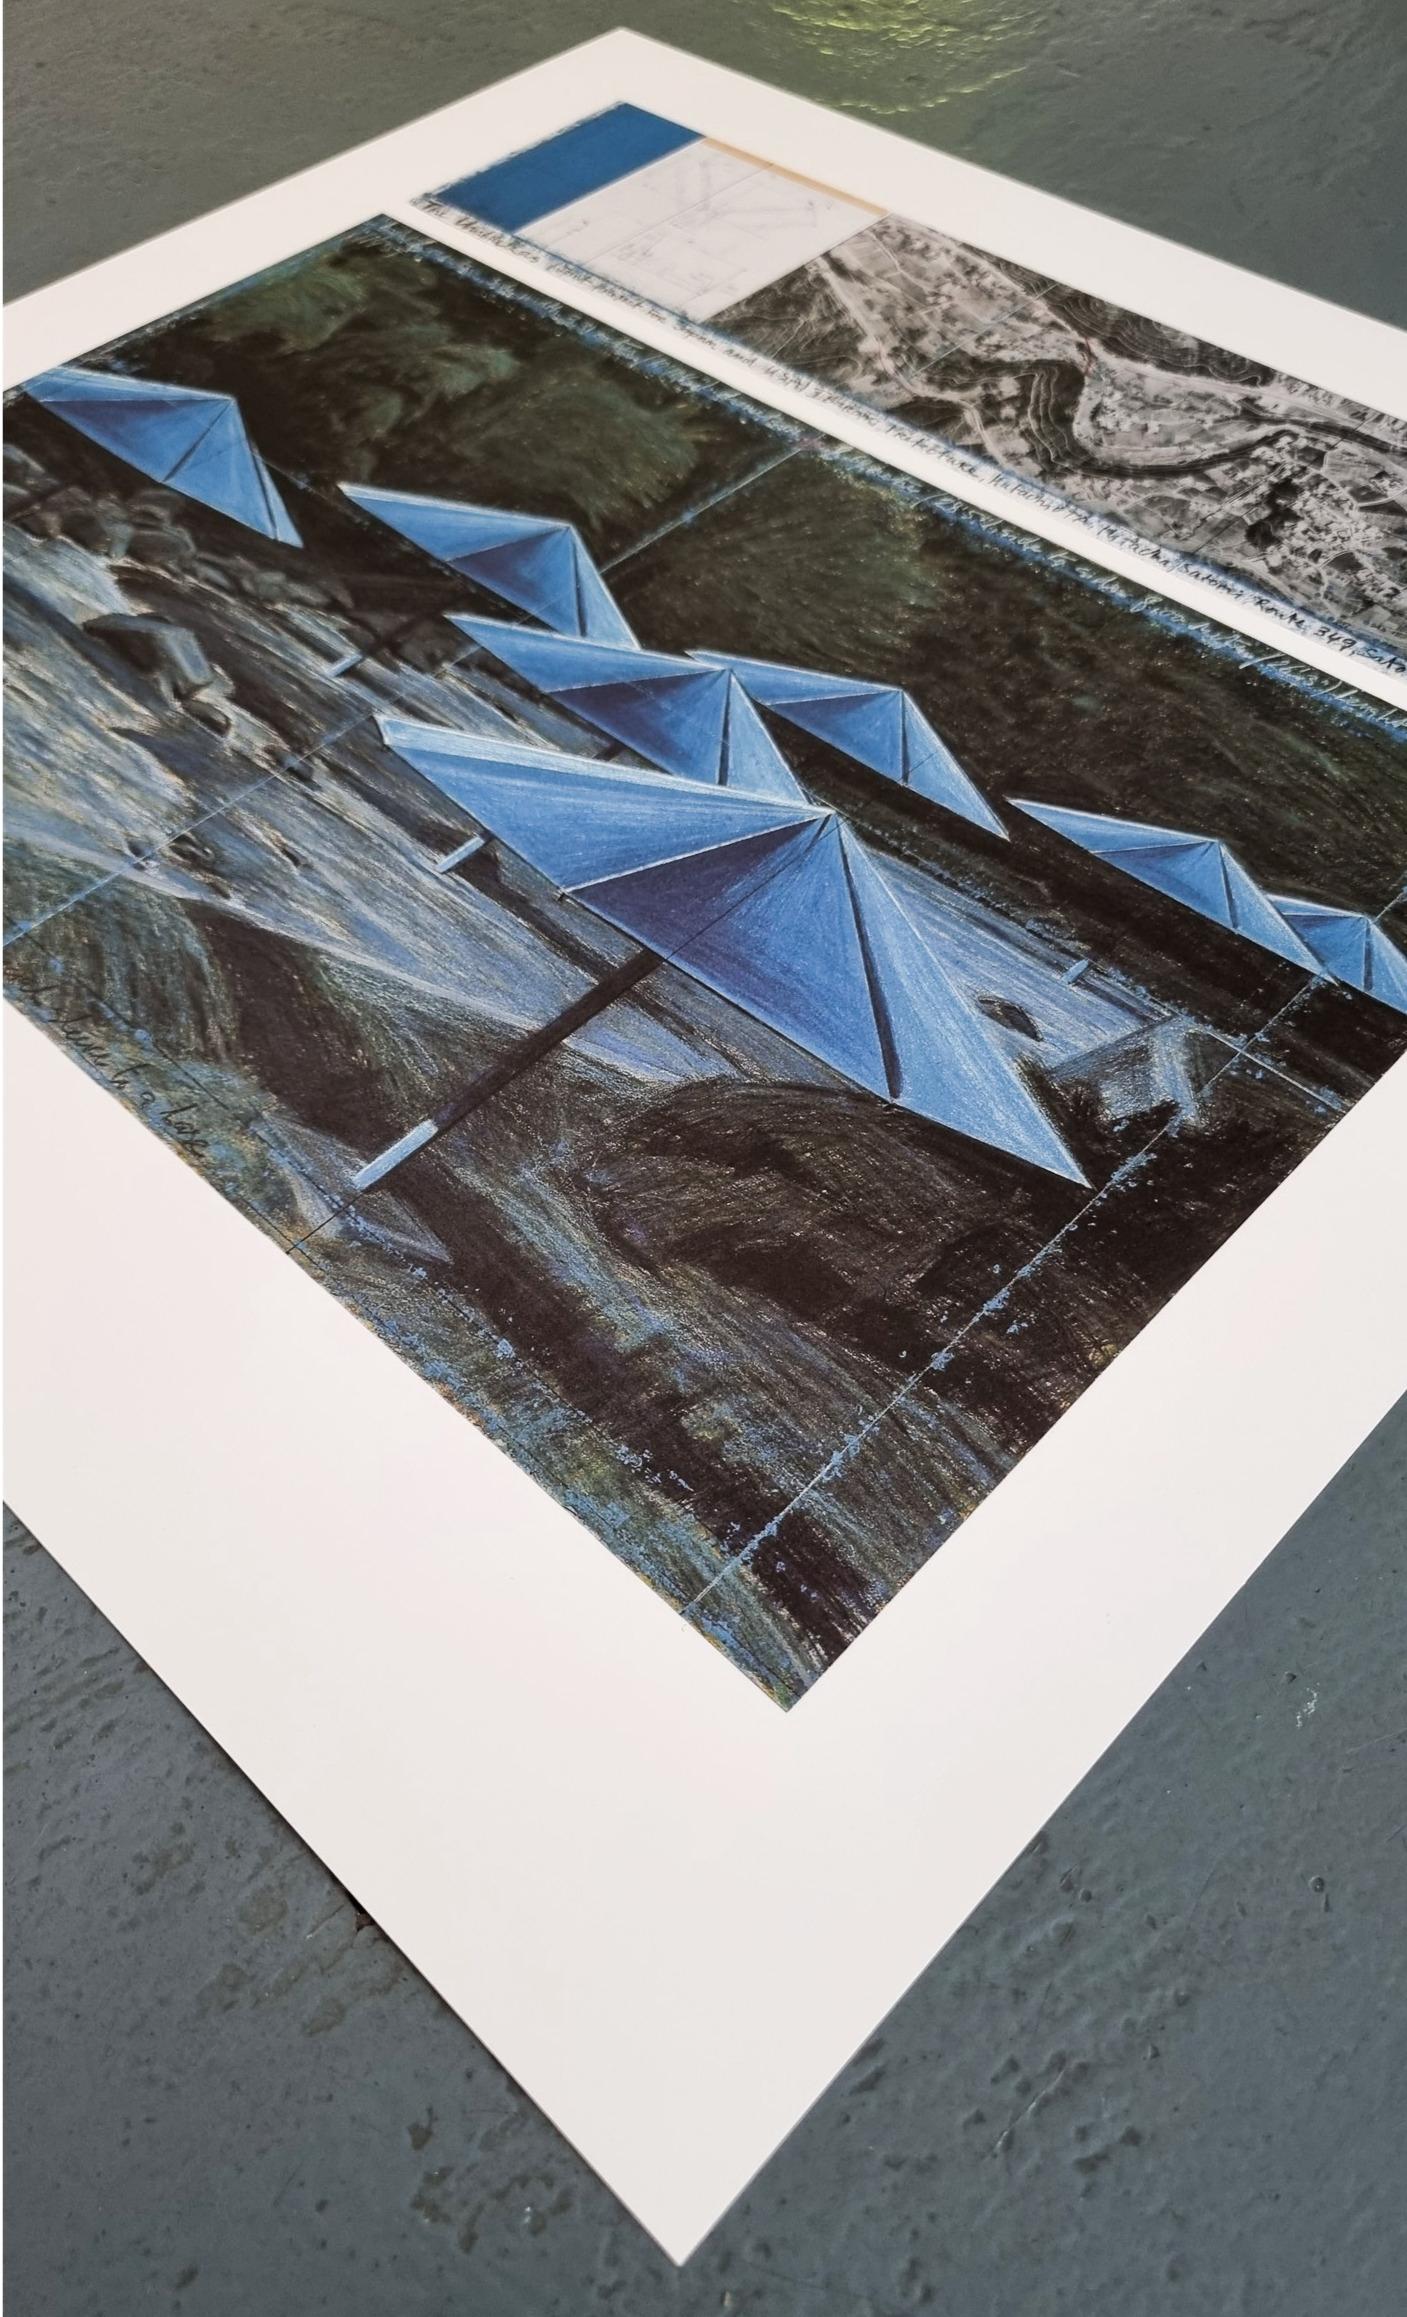 The Umbrellas (Blue) - Print by Christo and Jeanne-Claude